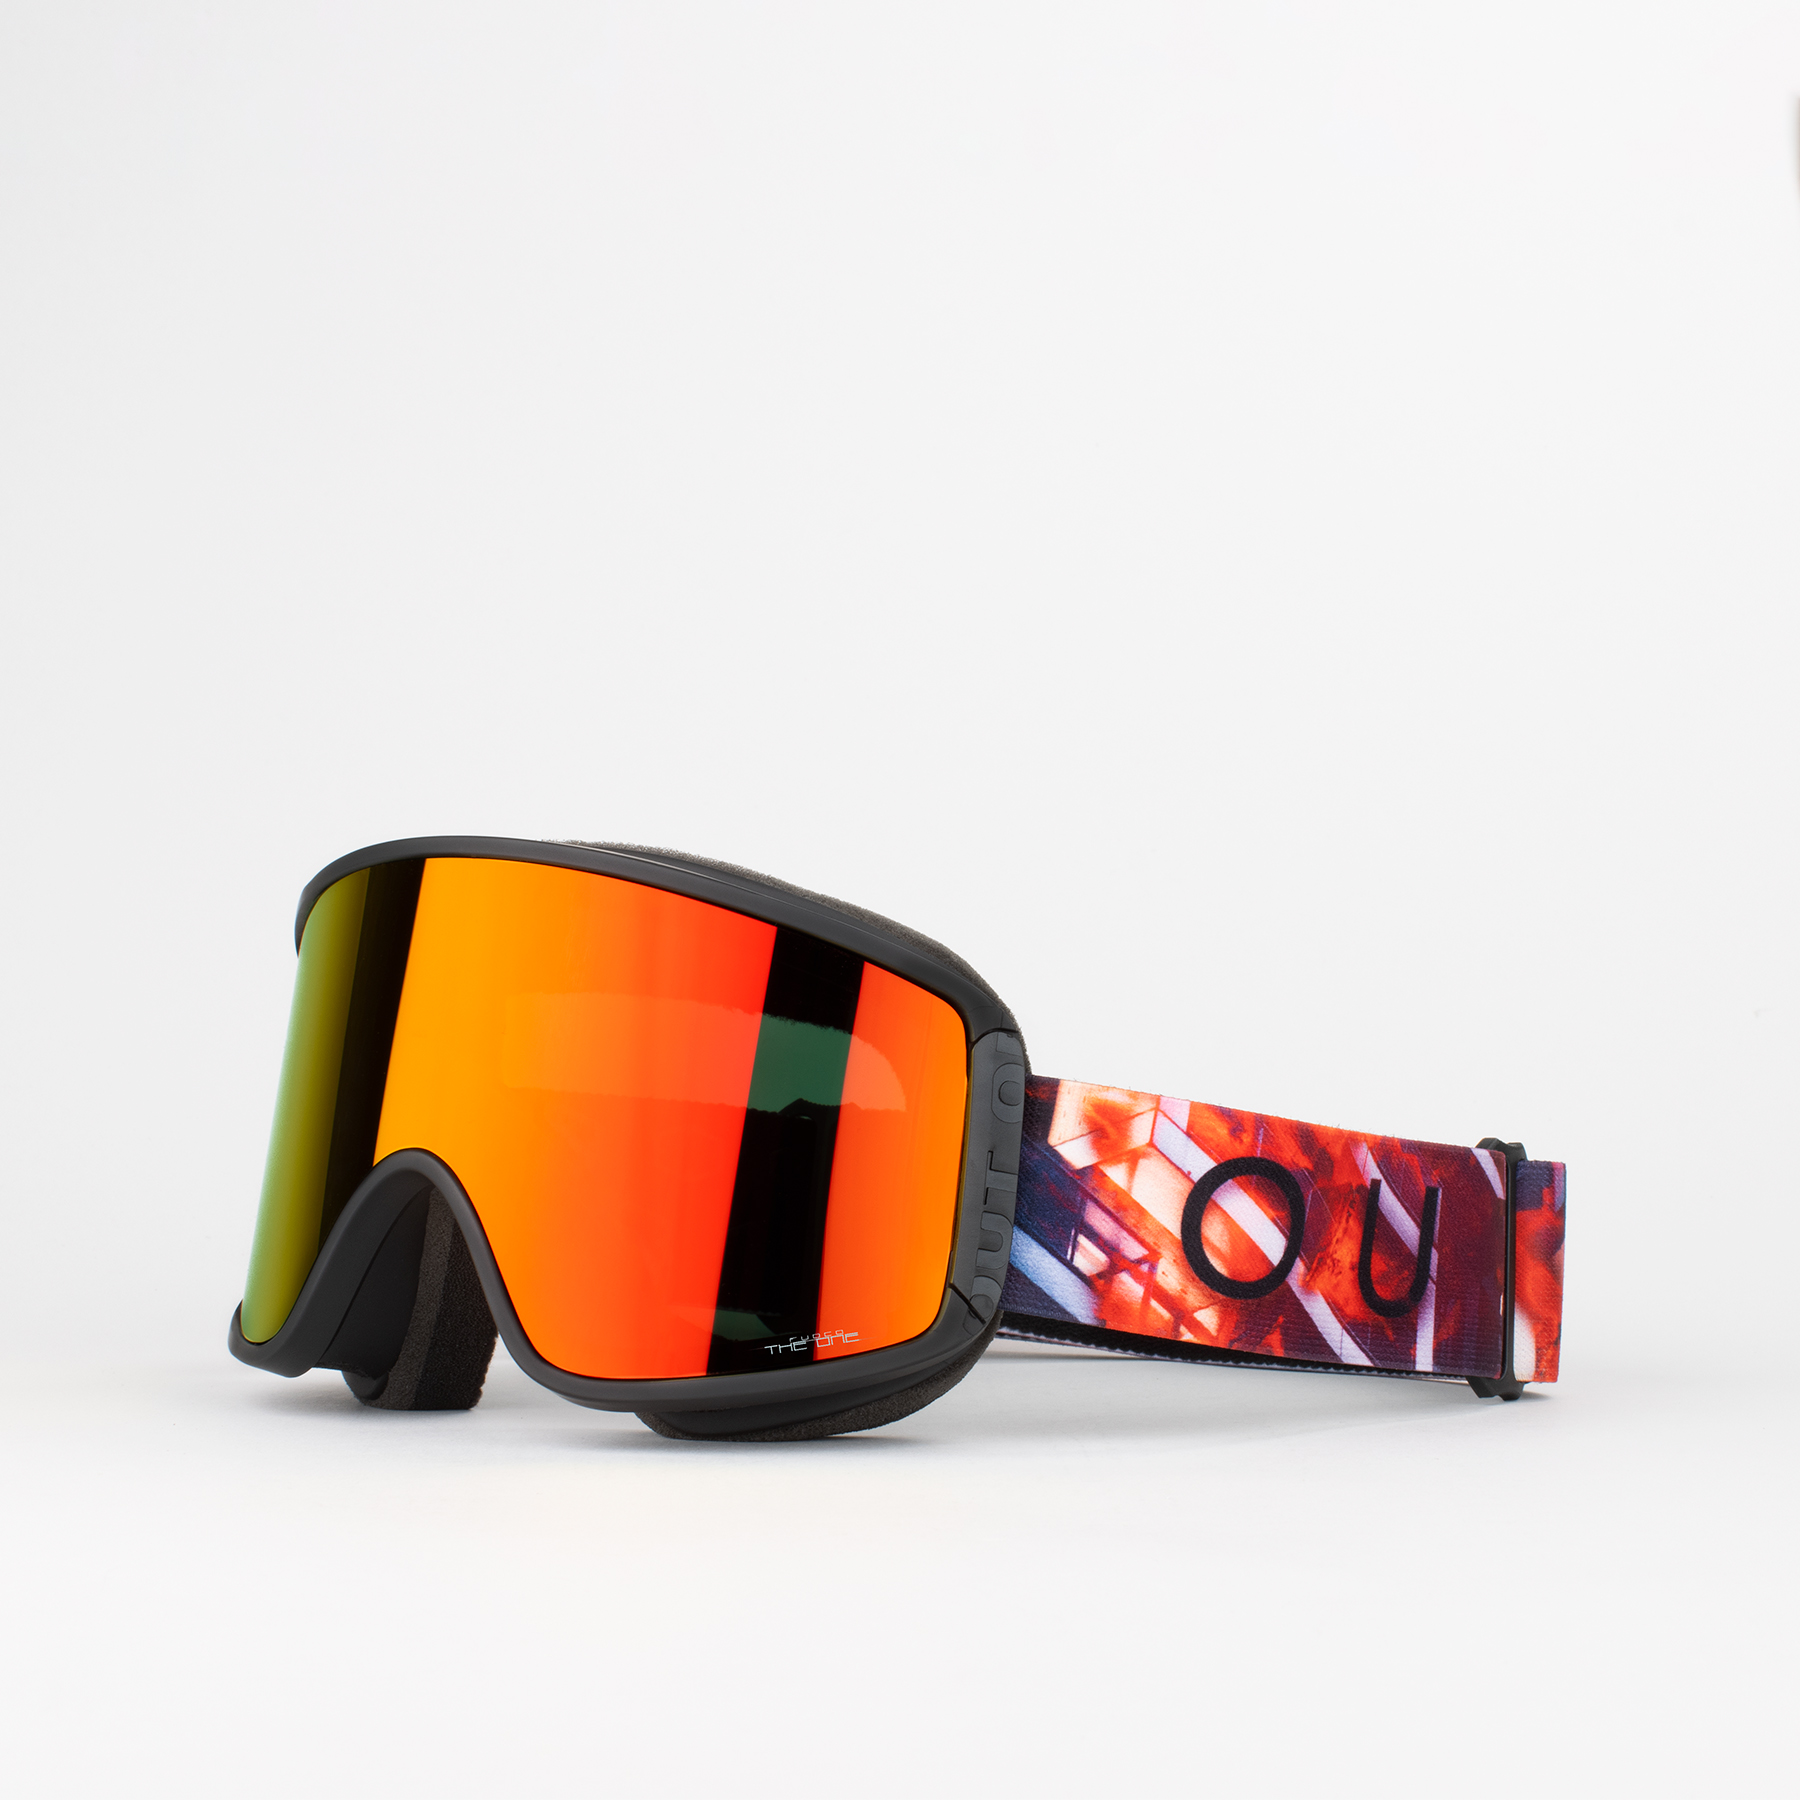 Shift Coals snow goggle with The One Fuoco lens